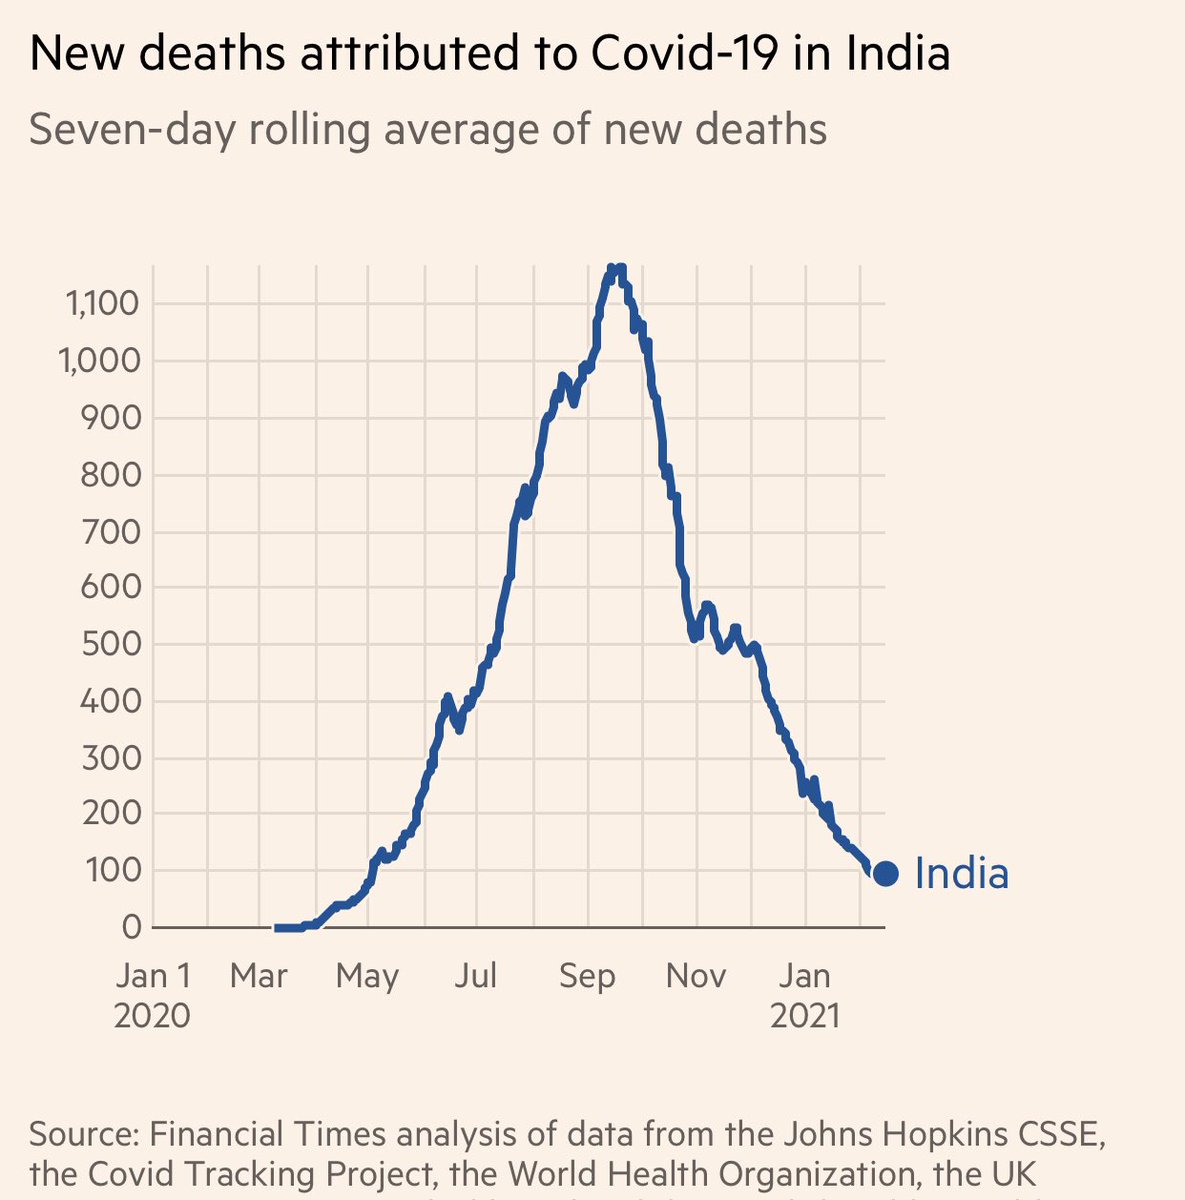 Disease severity not just deaths must be markedly less in India Reflected in the marked drop in number of cases even as social distancing became less. What we hear in big cities is: nearing herd immunityDelhi & Chennai reached 40-50% seroprevalence months ago!